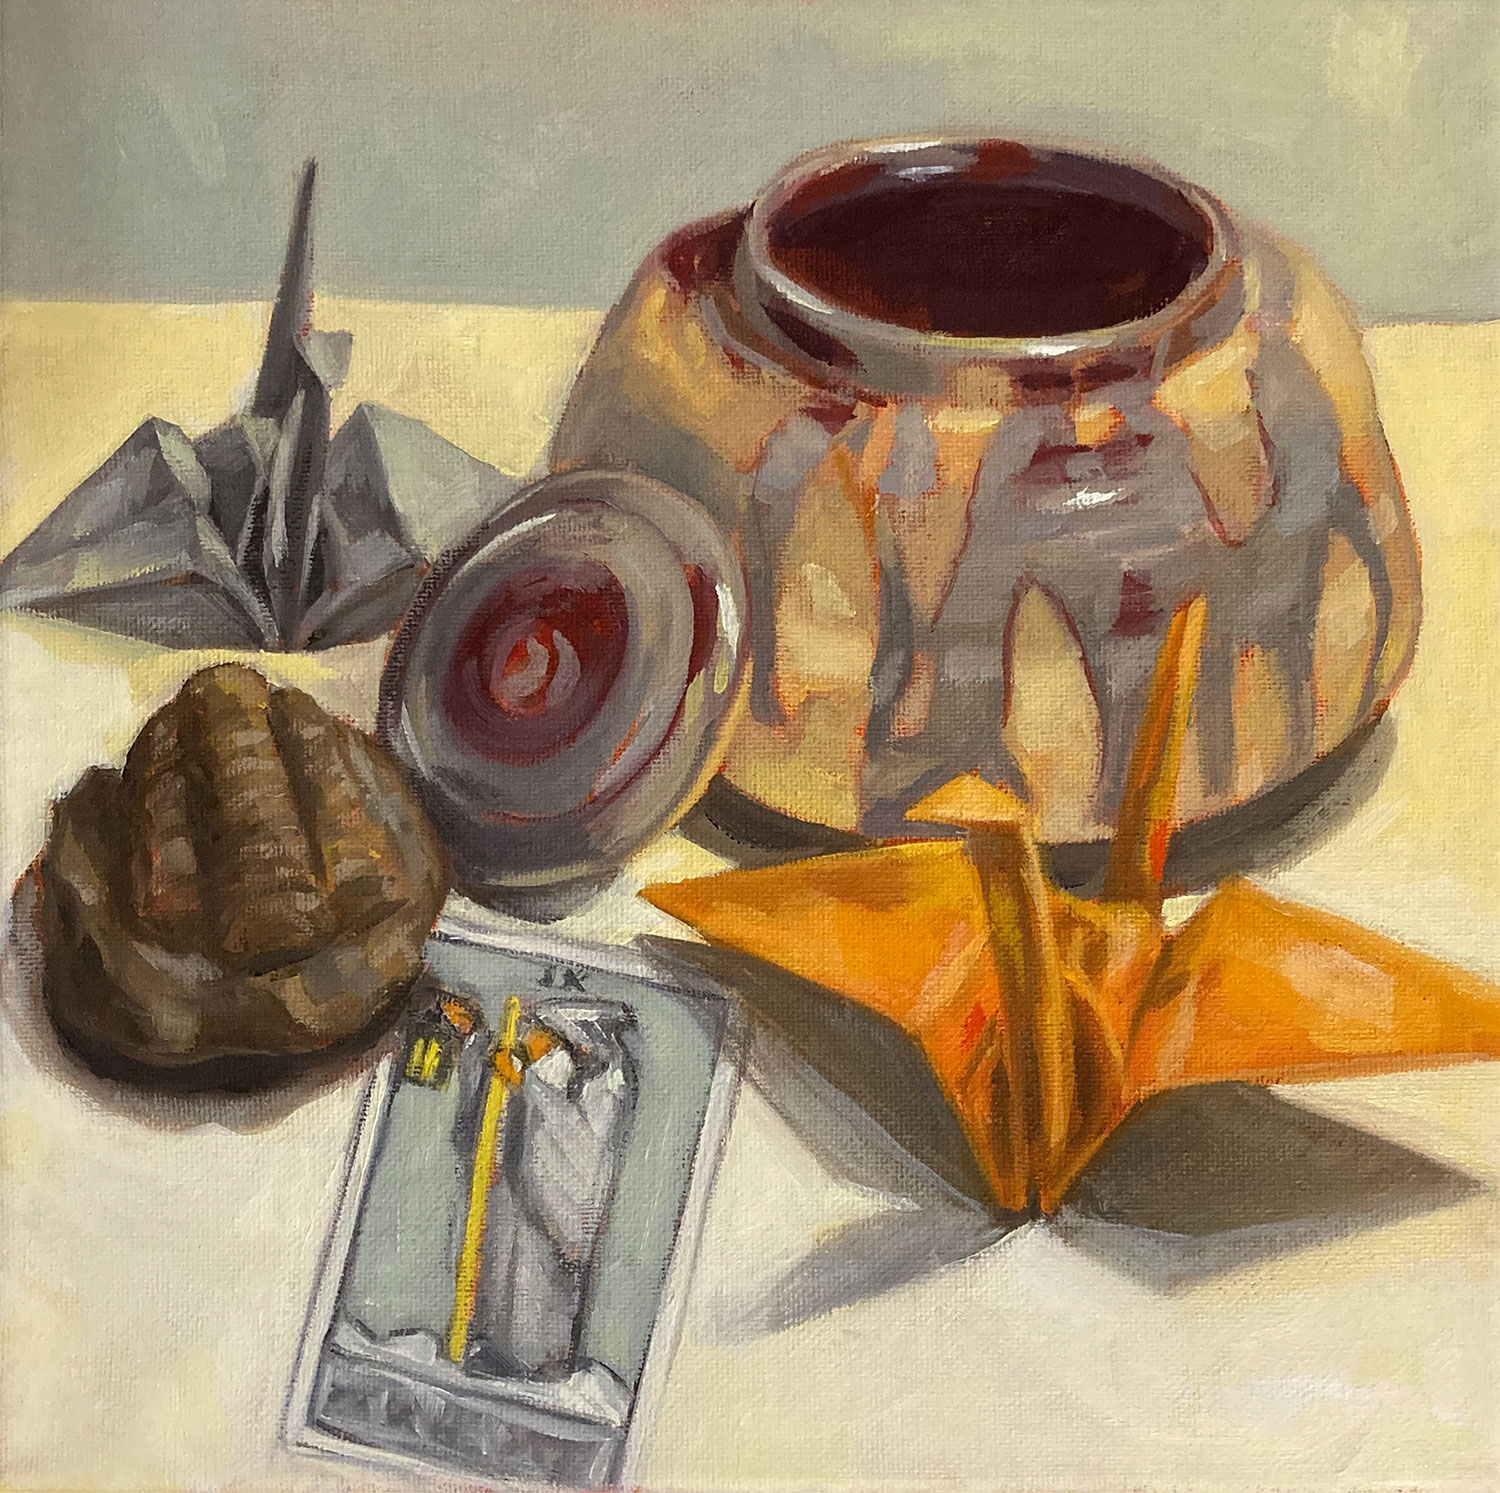 Painting of the Hermit tarot card, paper cranes and pottery jar.